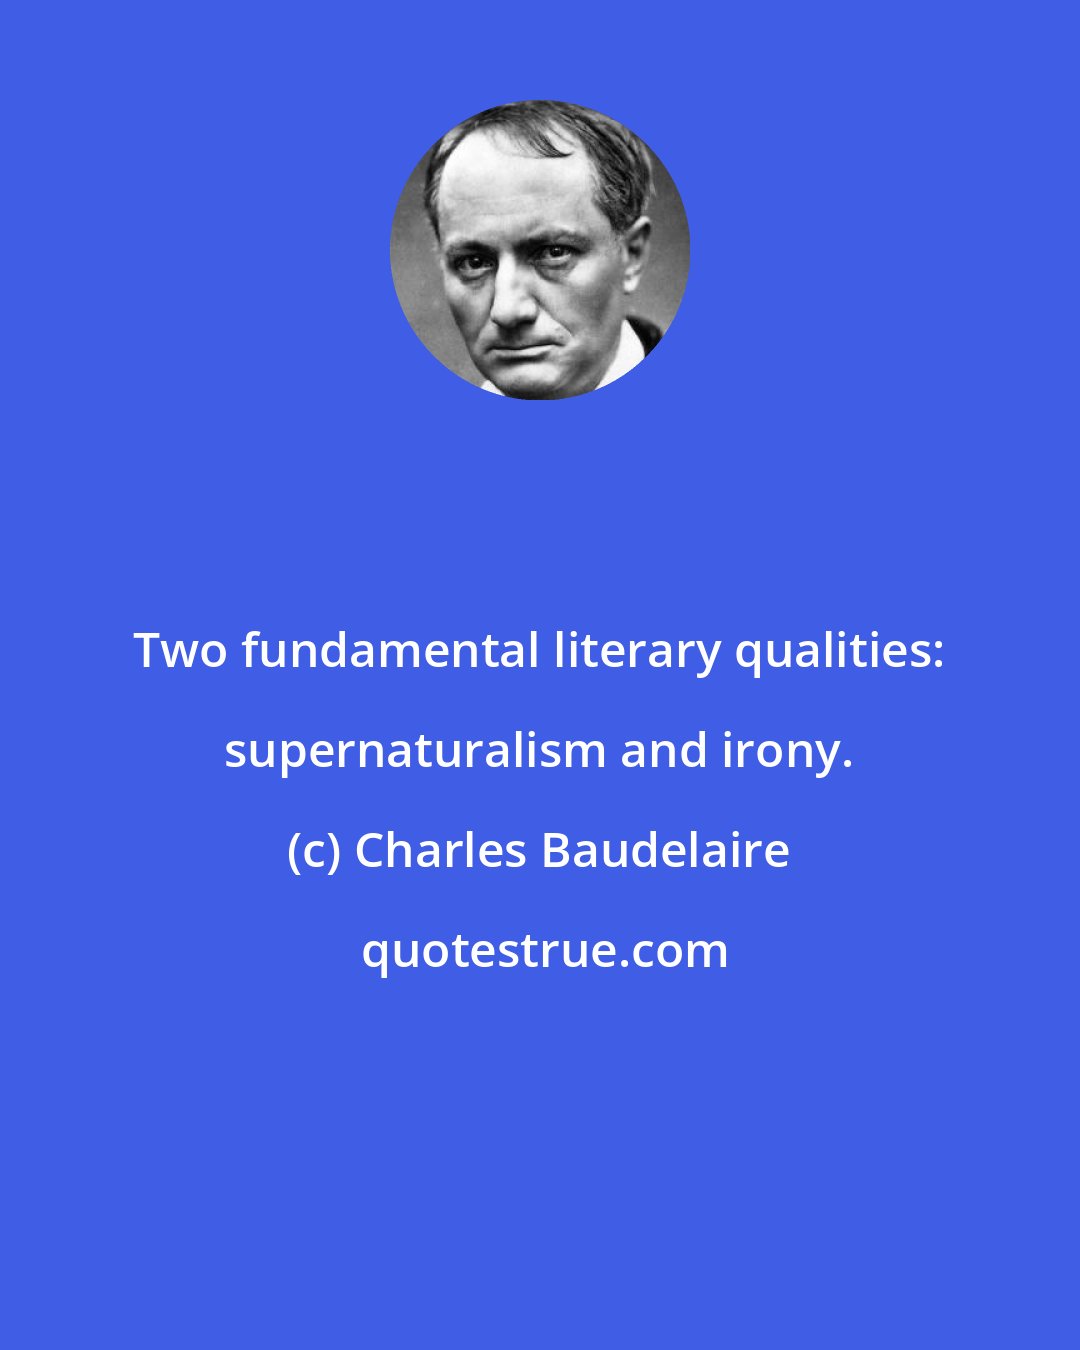 Charles Baudelaire: Two fundamental literary qualities: supernaturalism and irony.